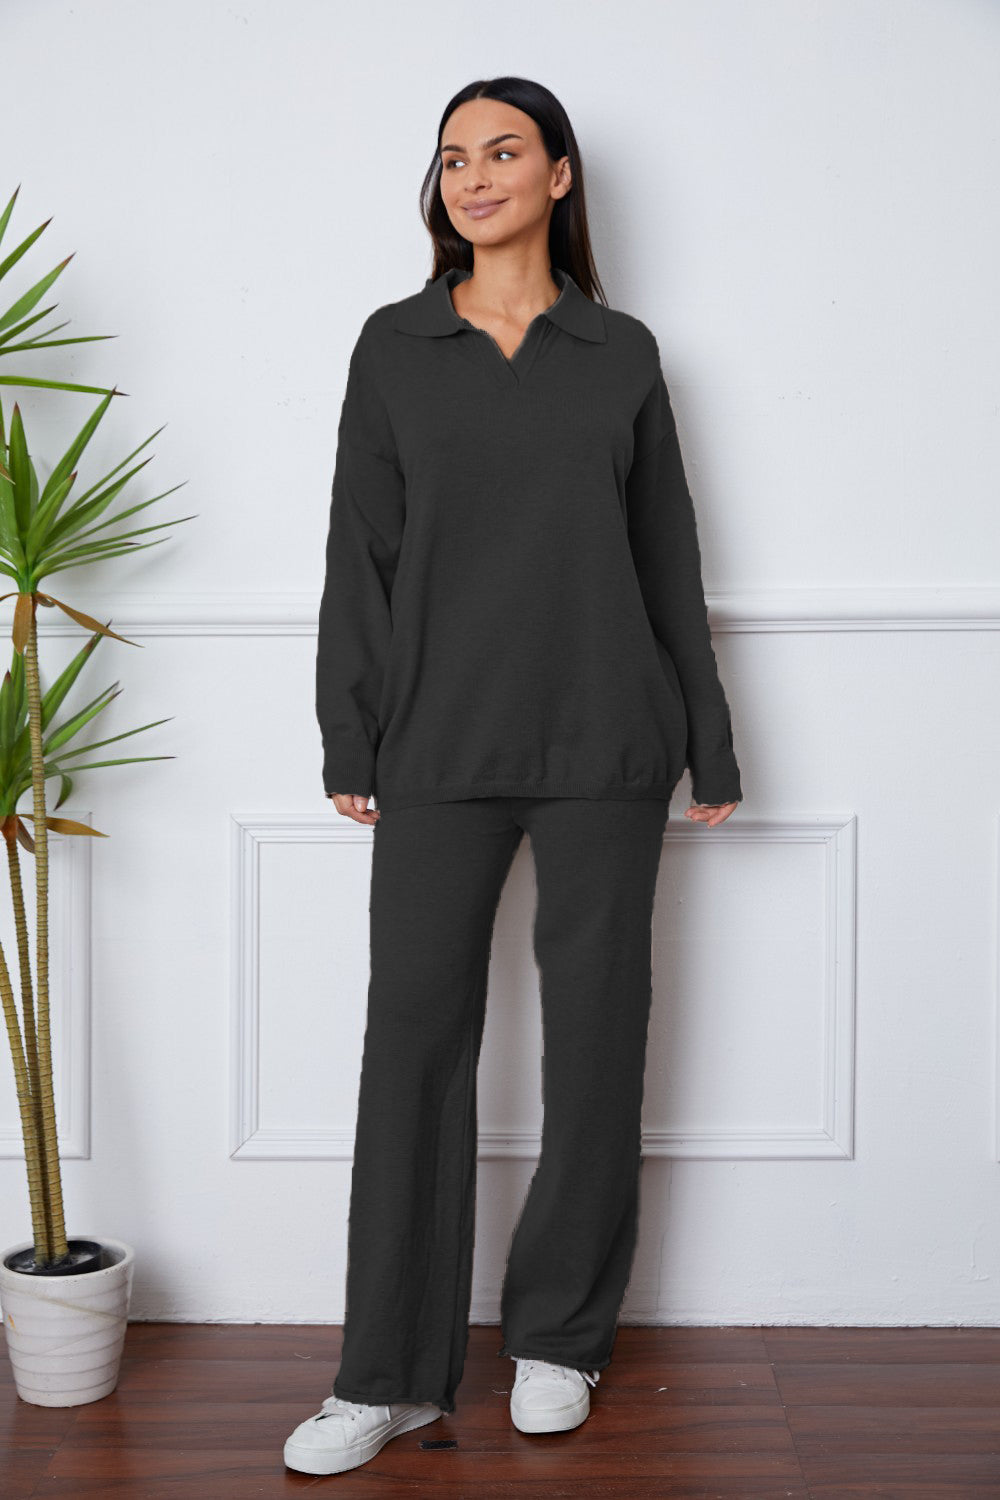 Women's Dropped Shoulder Sweater and Long Pants Set Black One Size